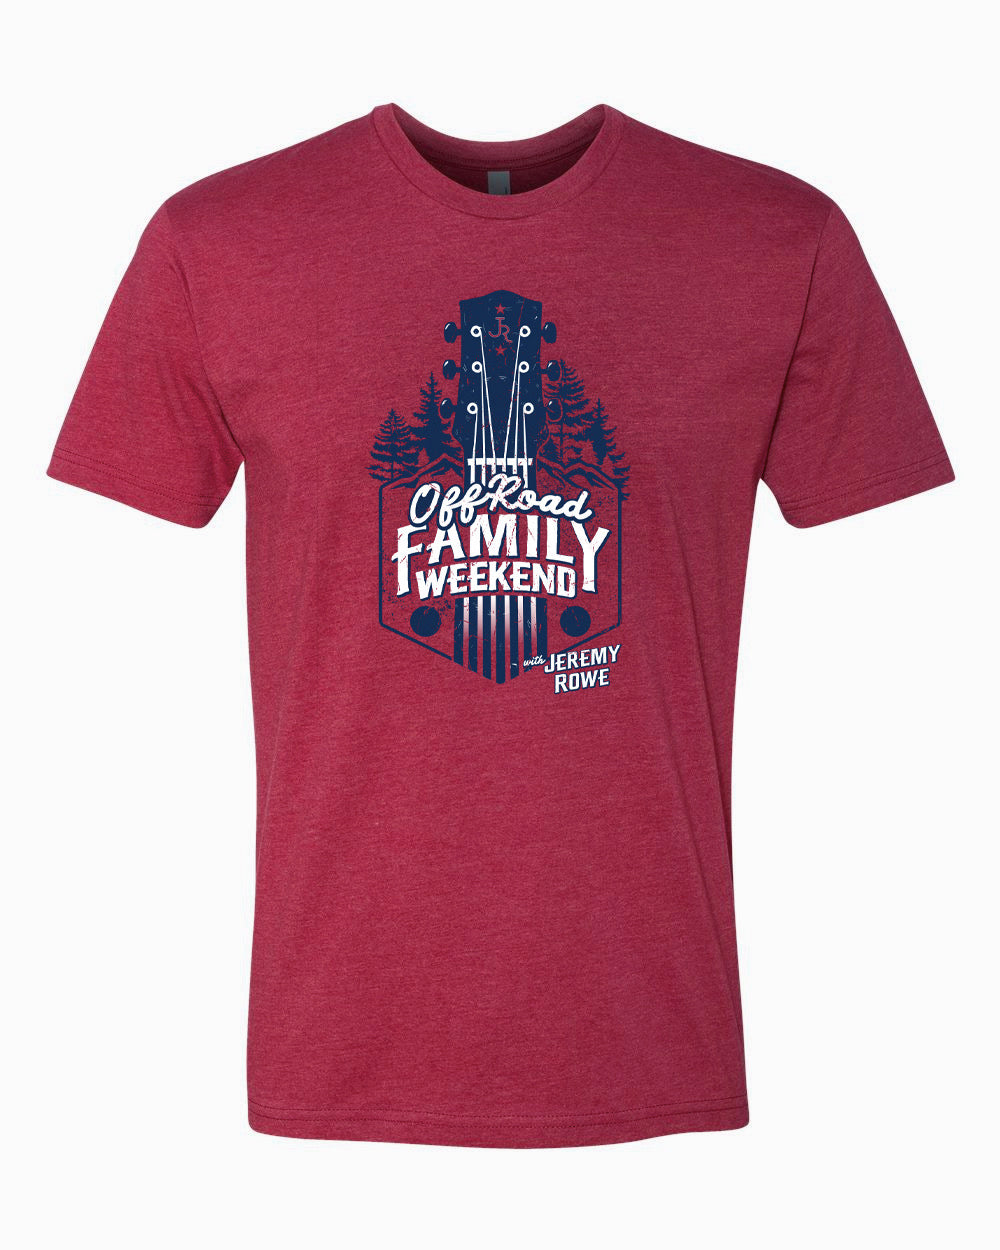 Off Road Family Weekend with Jeremy Rowe T-Shirt